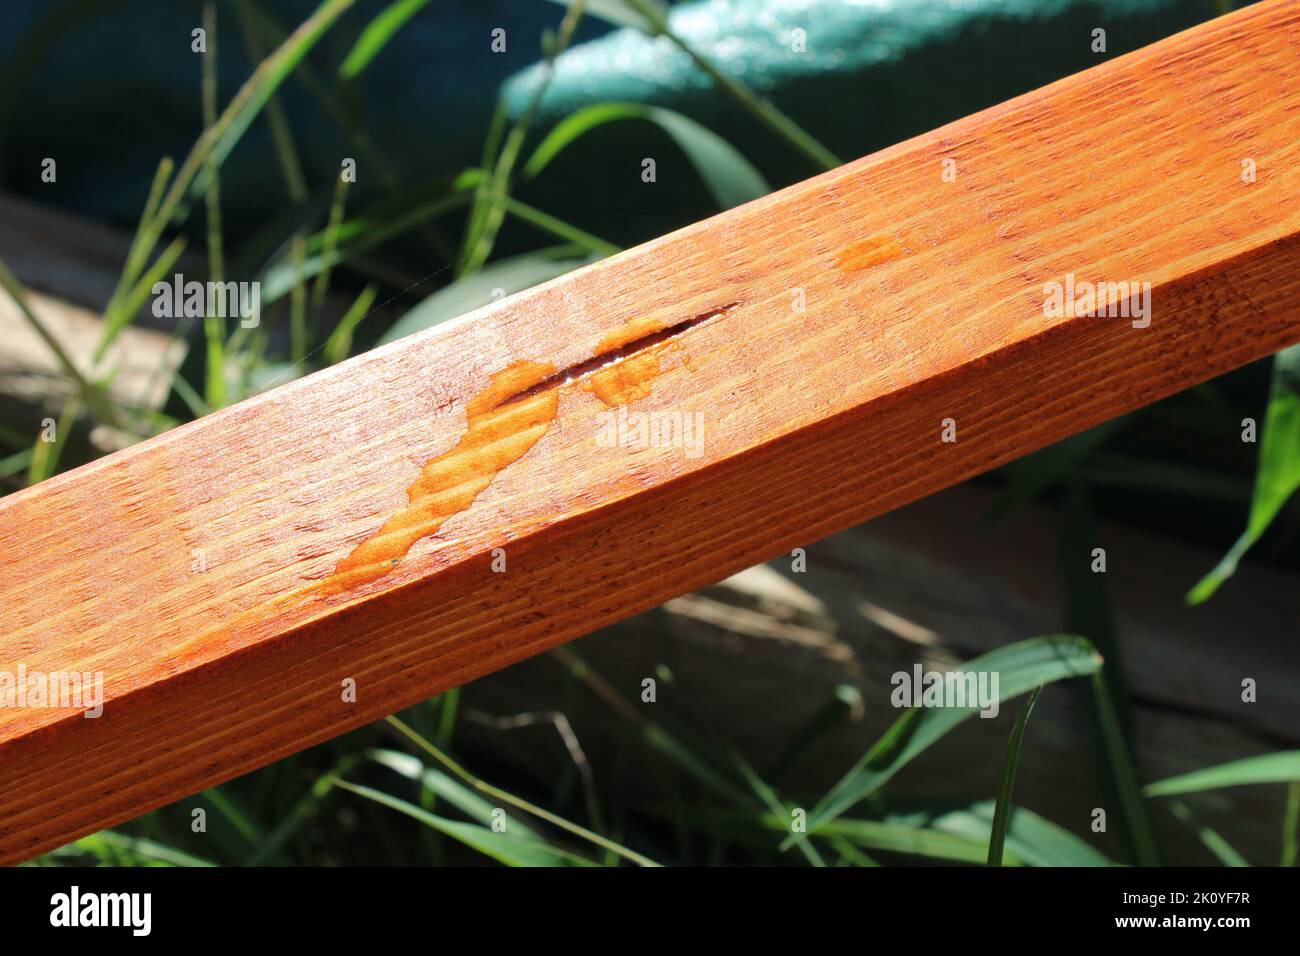 Sap Flowing From a Crack in a Stained Piece of Lumber Stock Photo